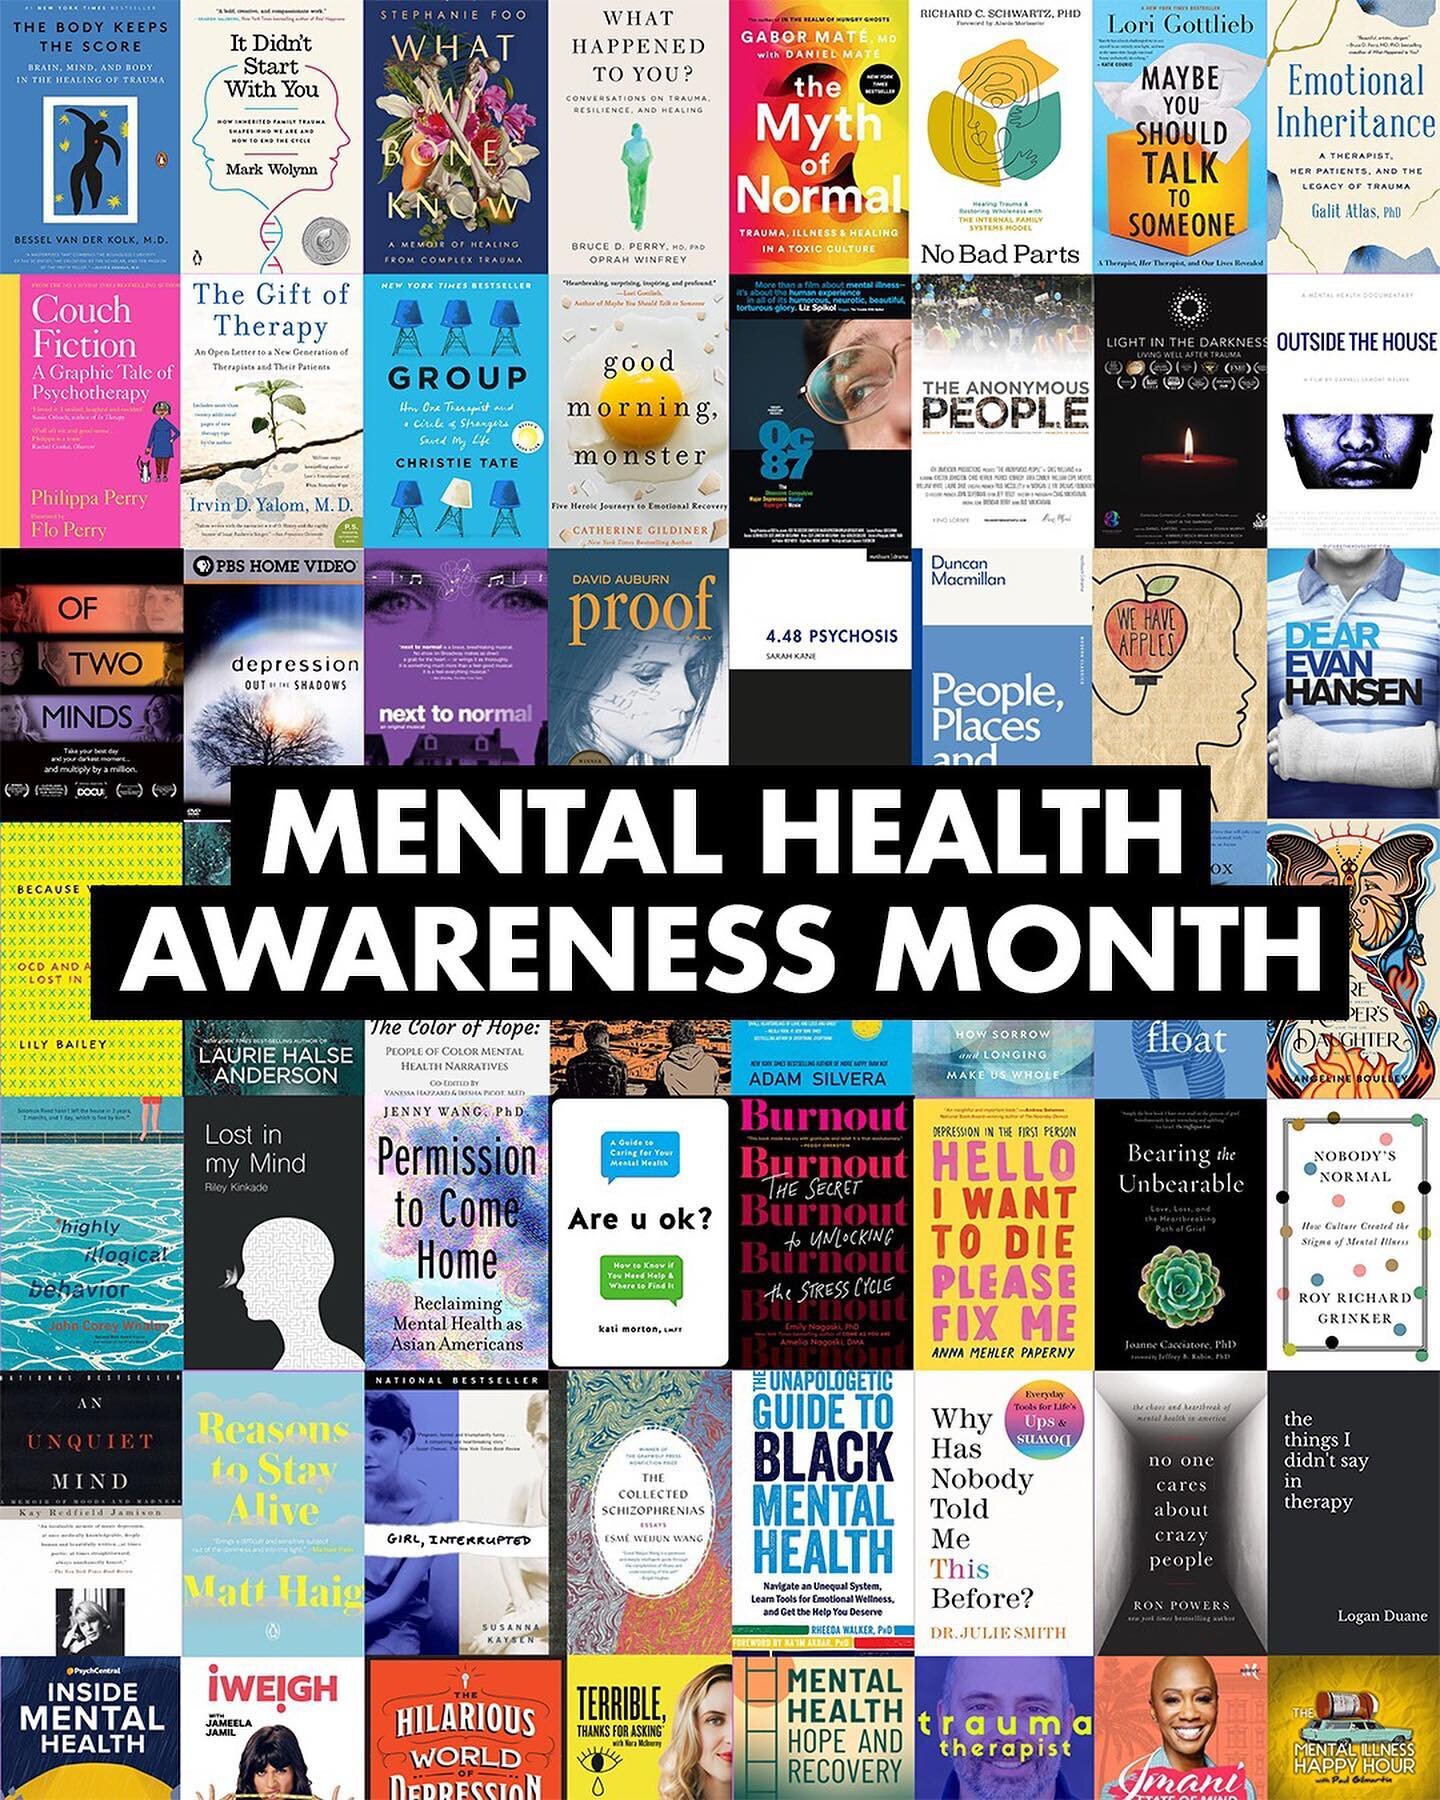 May is #MentalHealthAwarenessMonth. We've compiled a running list of books, movies, and podcasts to help you learn about mental health and mental illnesses.

Share your other suggestions in the comments⬇️